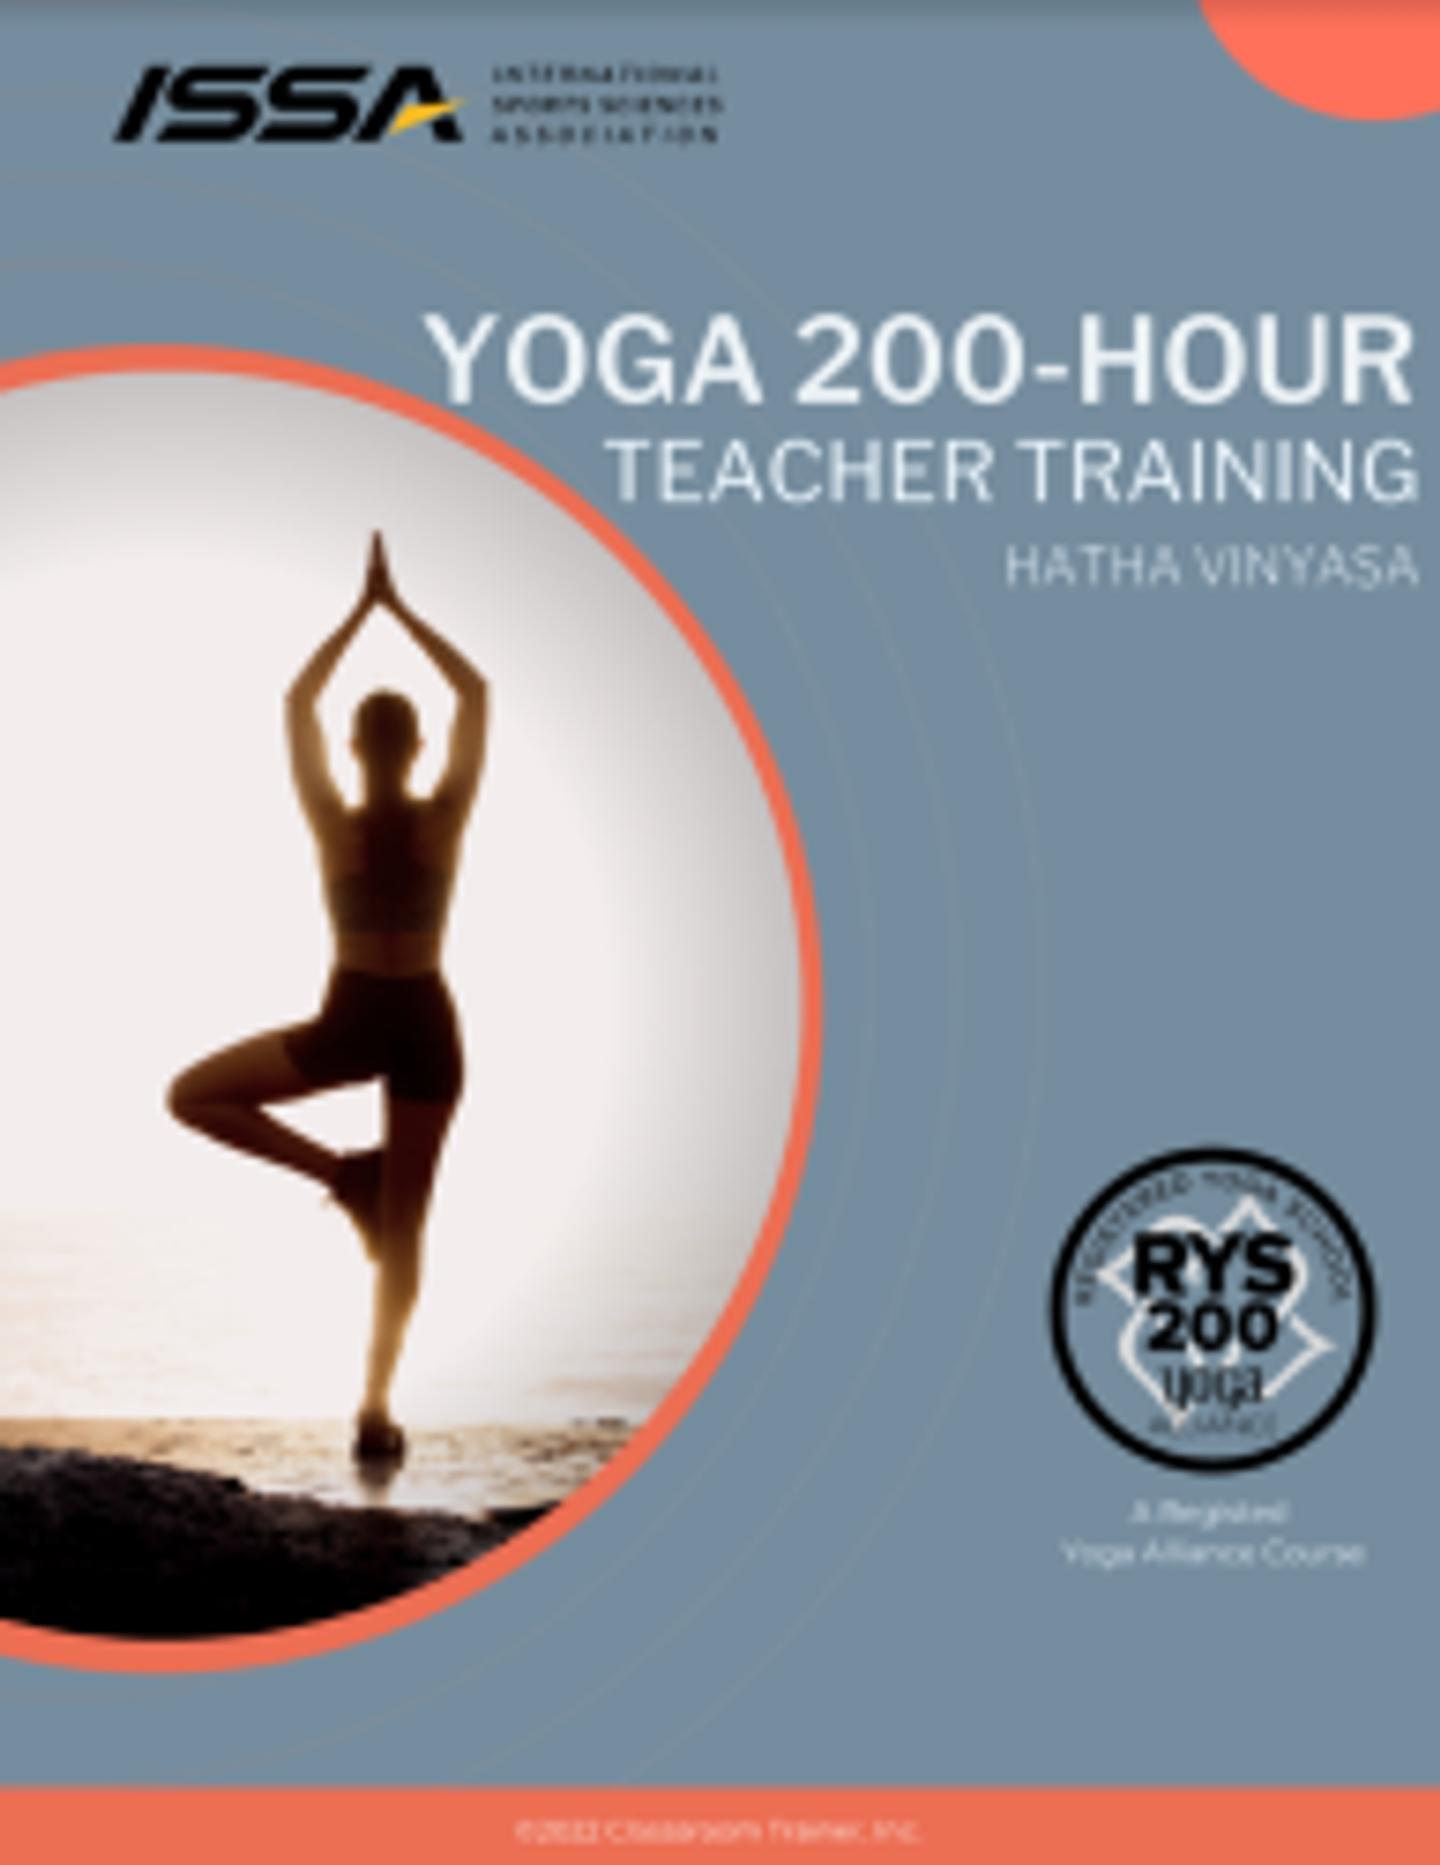 ISSA-yoga-200-whats-included-image